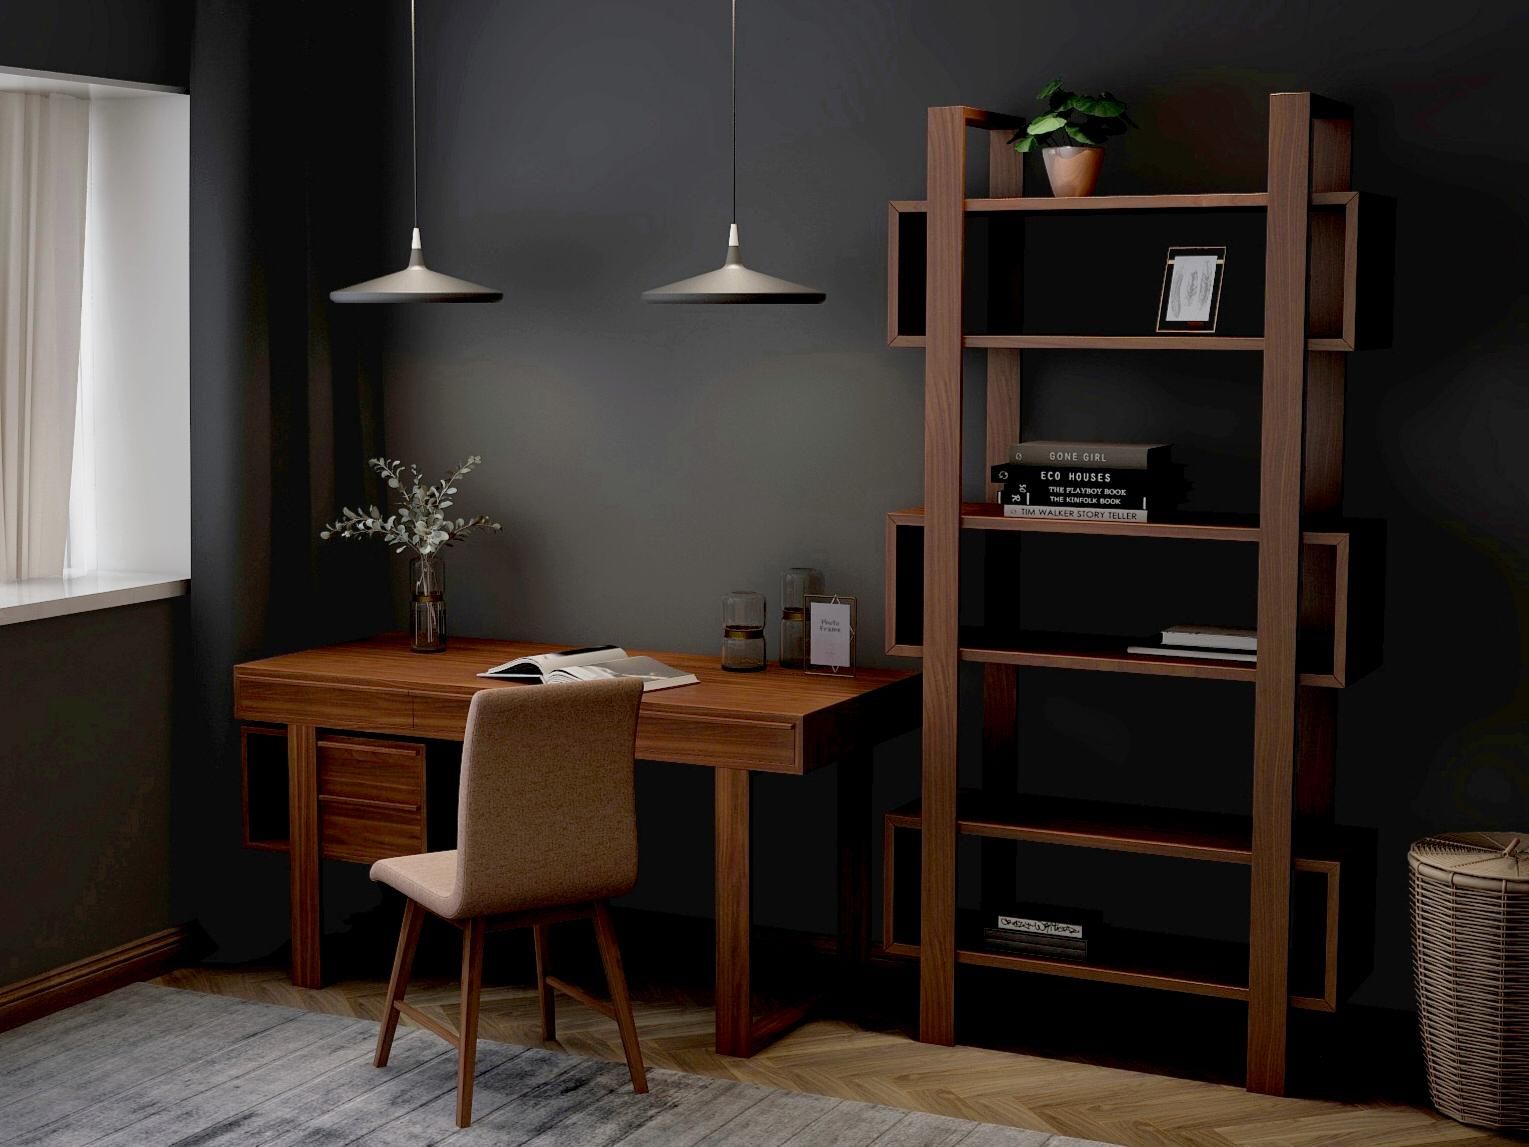 squarerooms-commune-local-furniture-excelsior-writing-desk-dark-moody-wooden-study-home-office